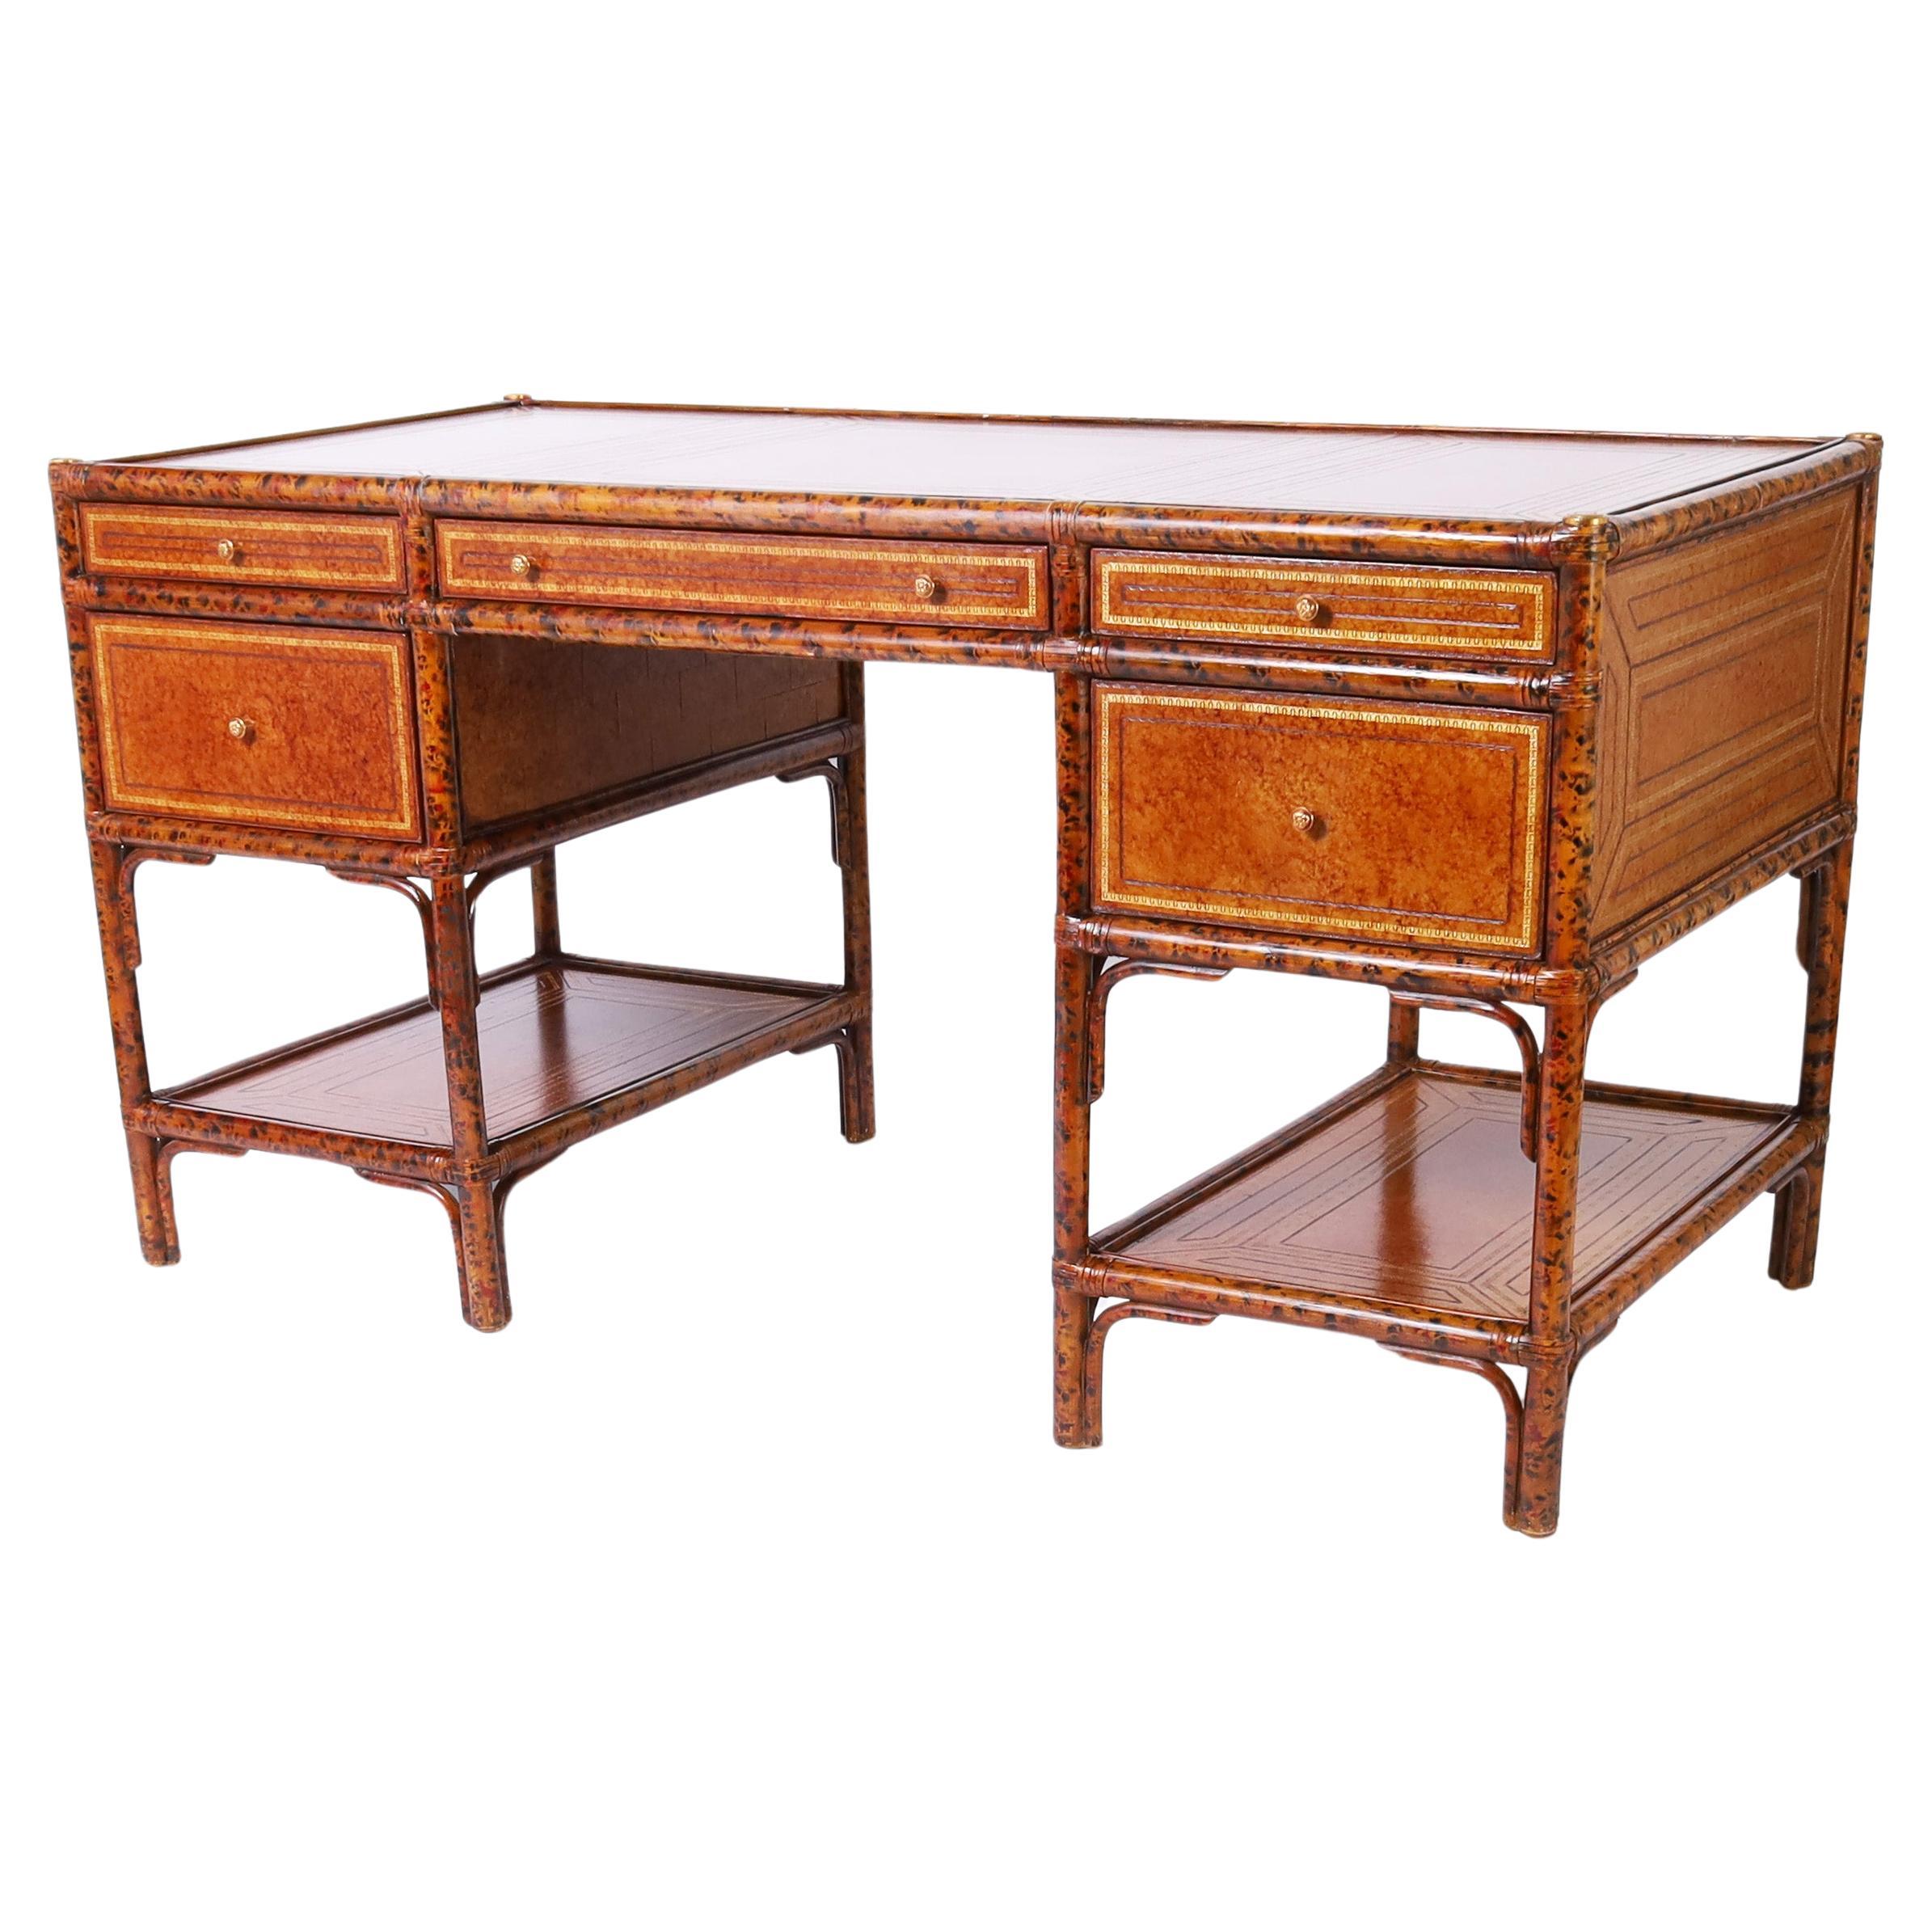 British Colonial Style Faux Bamboo Leather Clad Desk by Maitland-Smith For Sale